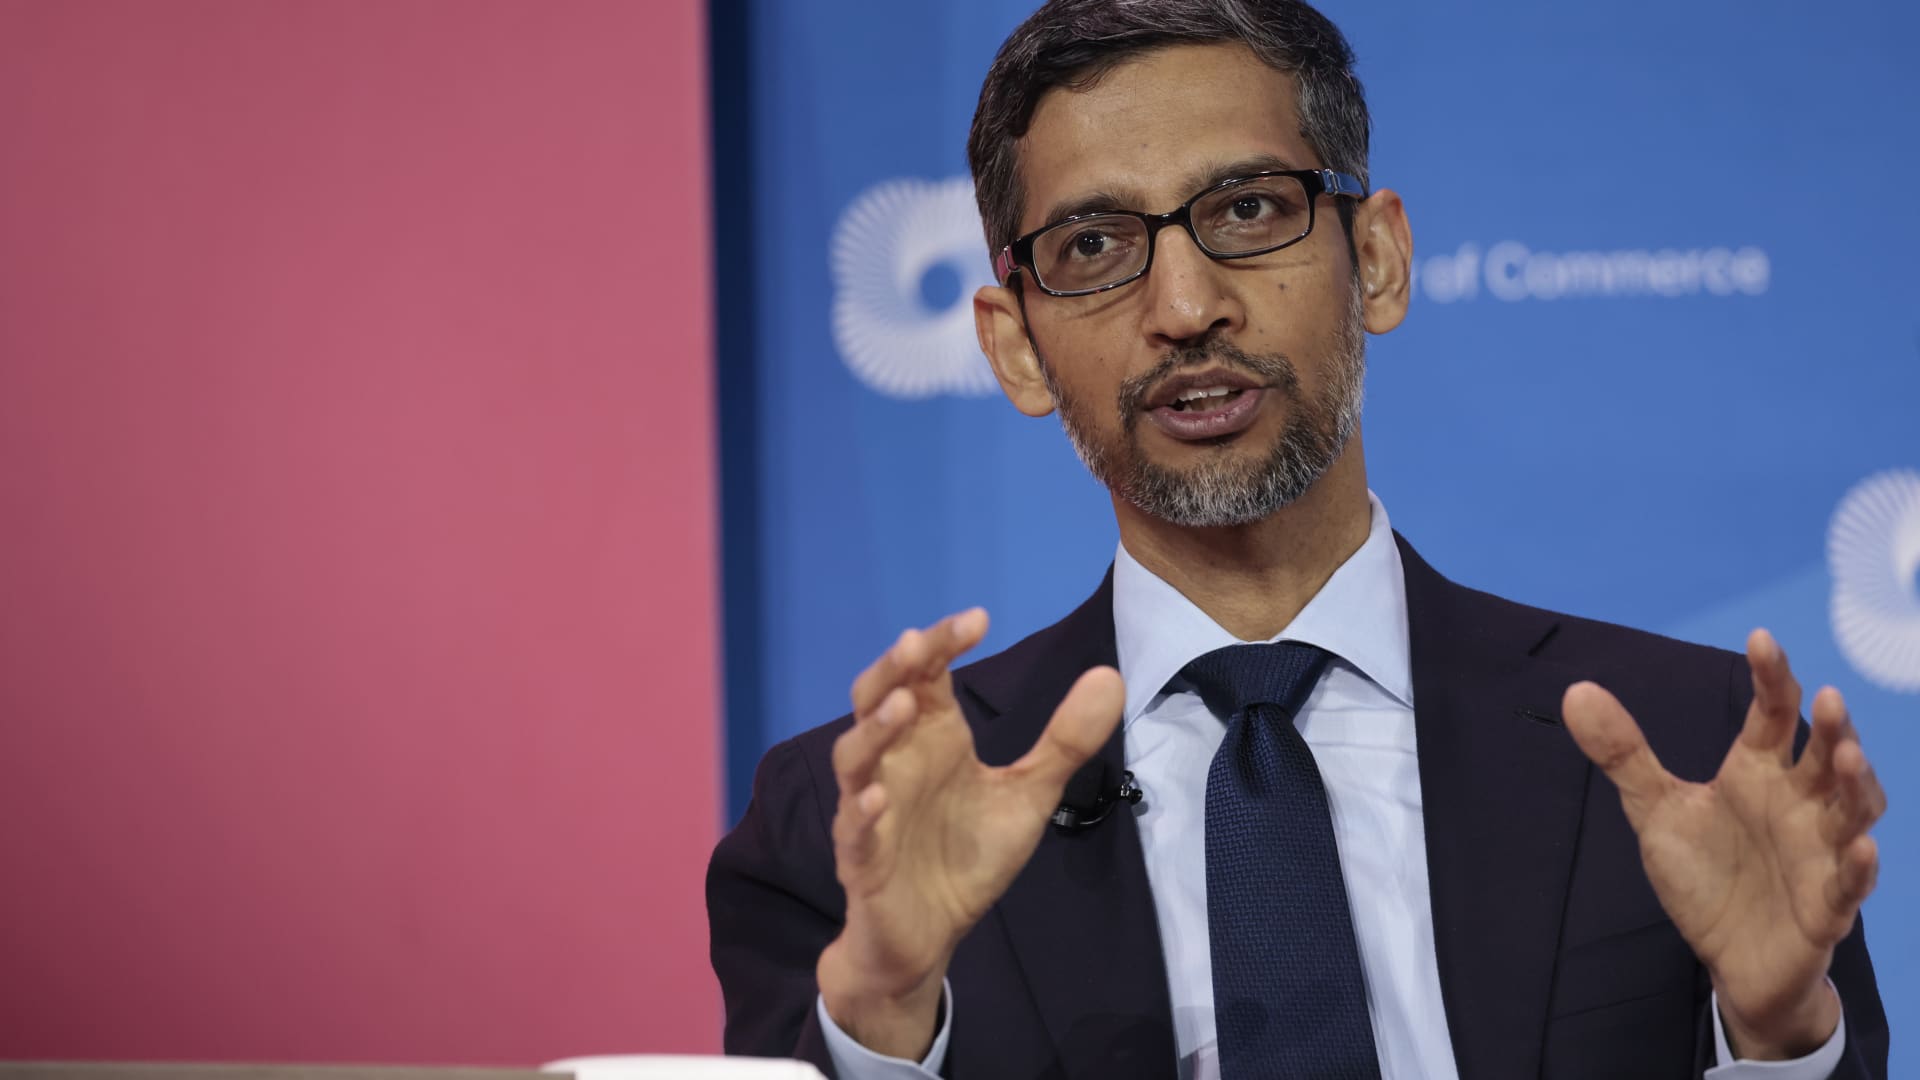 Google says it will slow hiring through 2023 in memo to employees